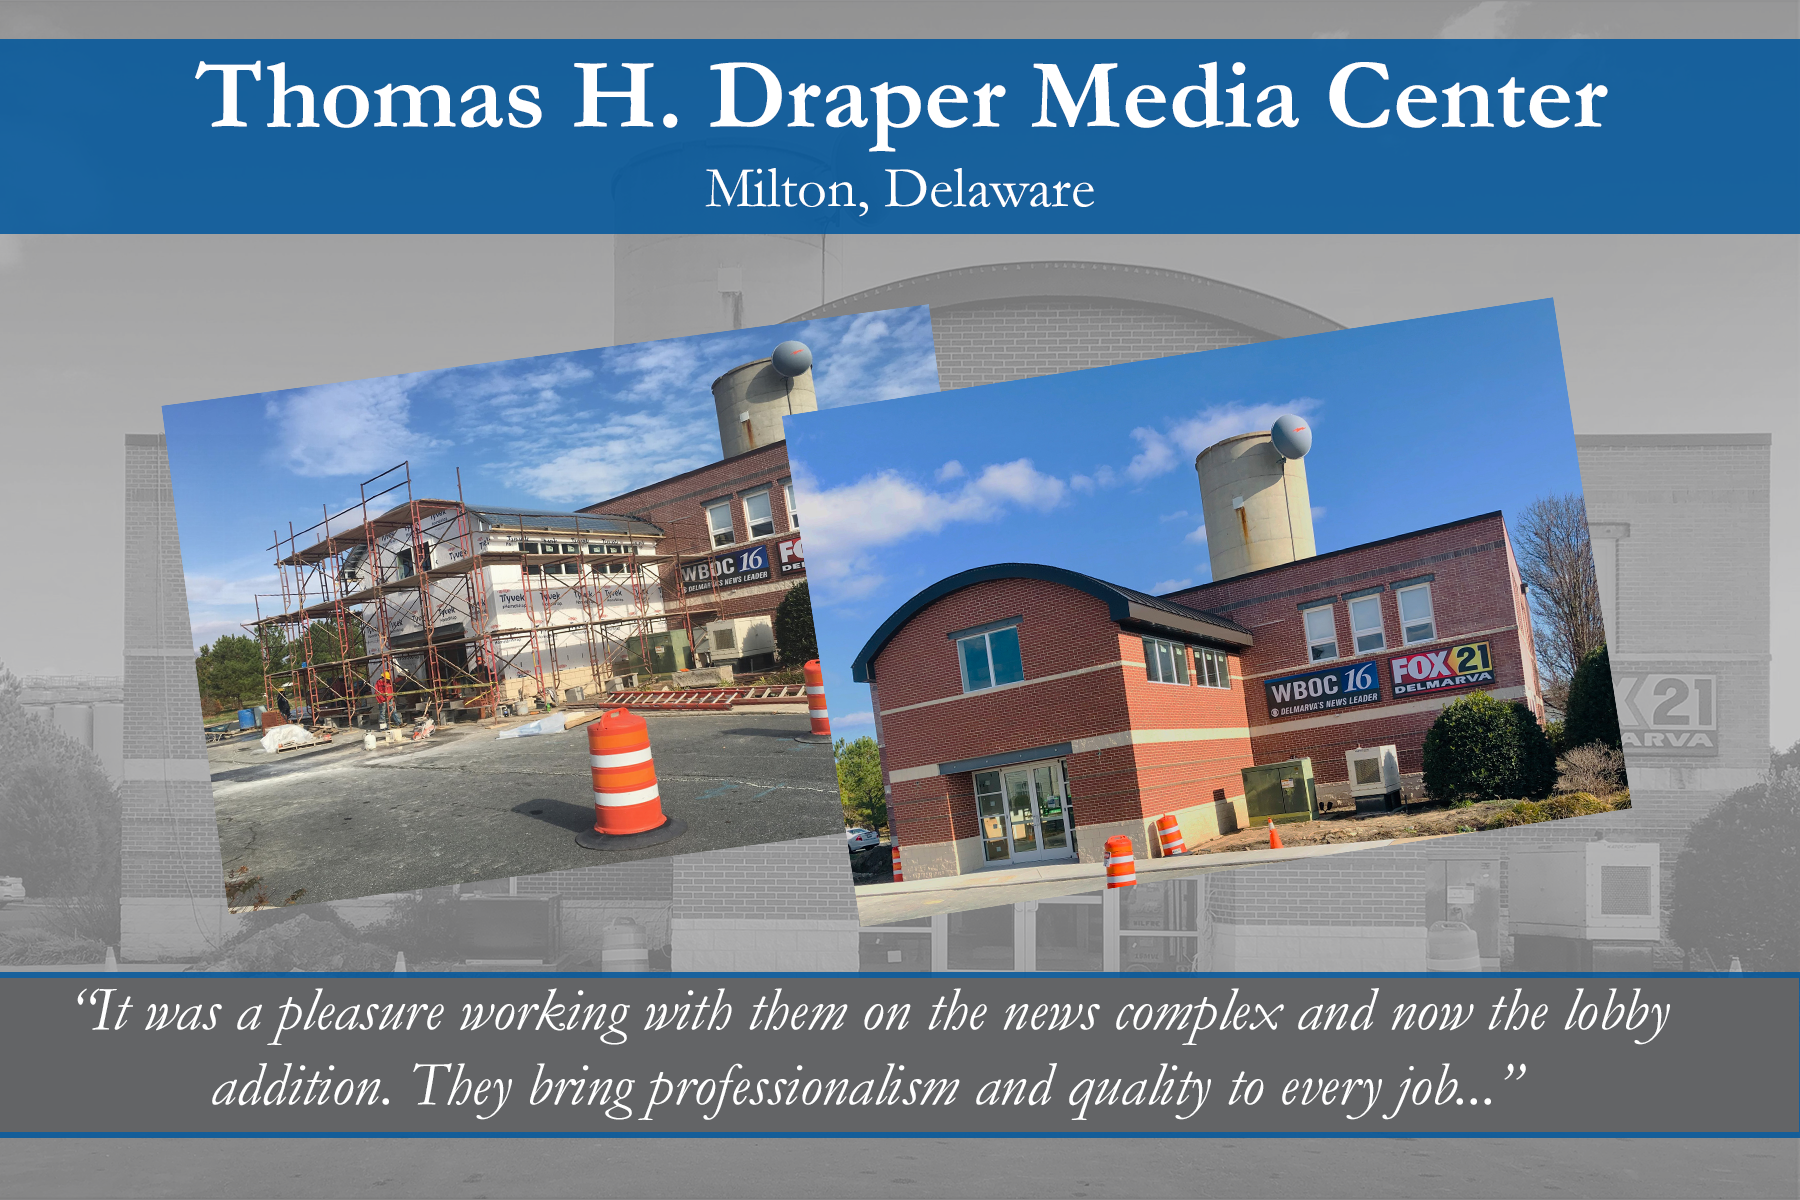 Gillis Gilkerson to Complete Thomas H. Draper Media Center by January 2020